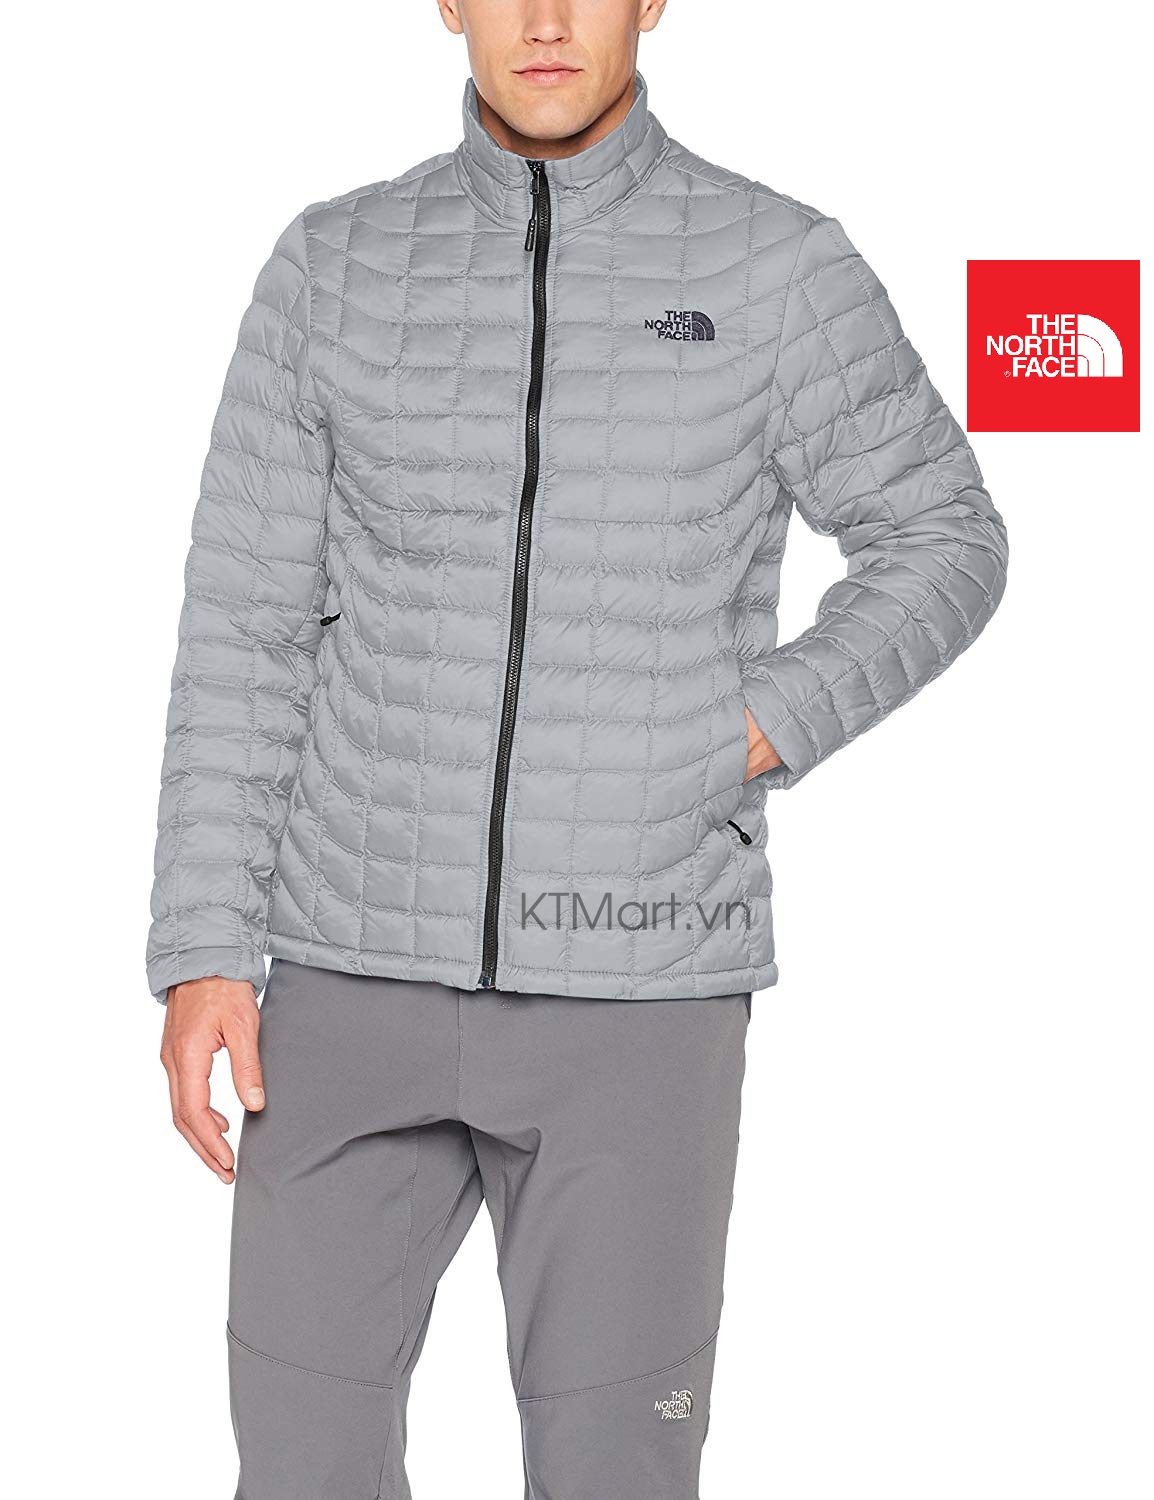 The North Face Men’s Thermoball Full Zip Jacket NF00C762 The North Face size L